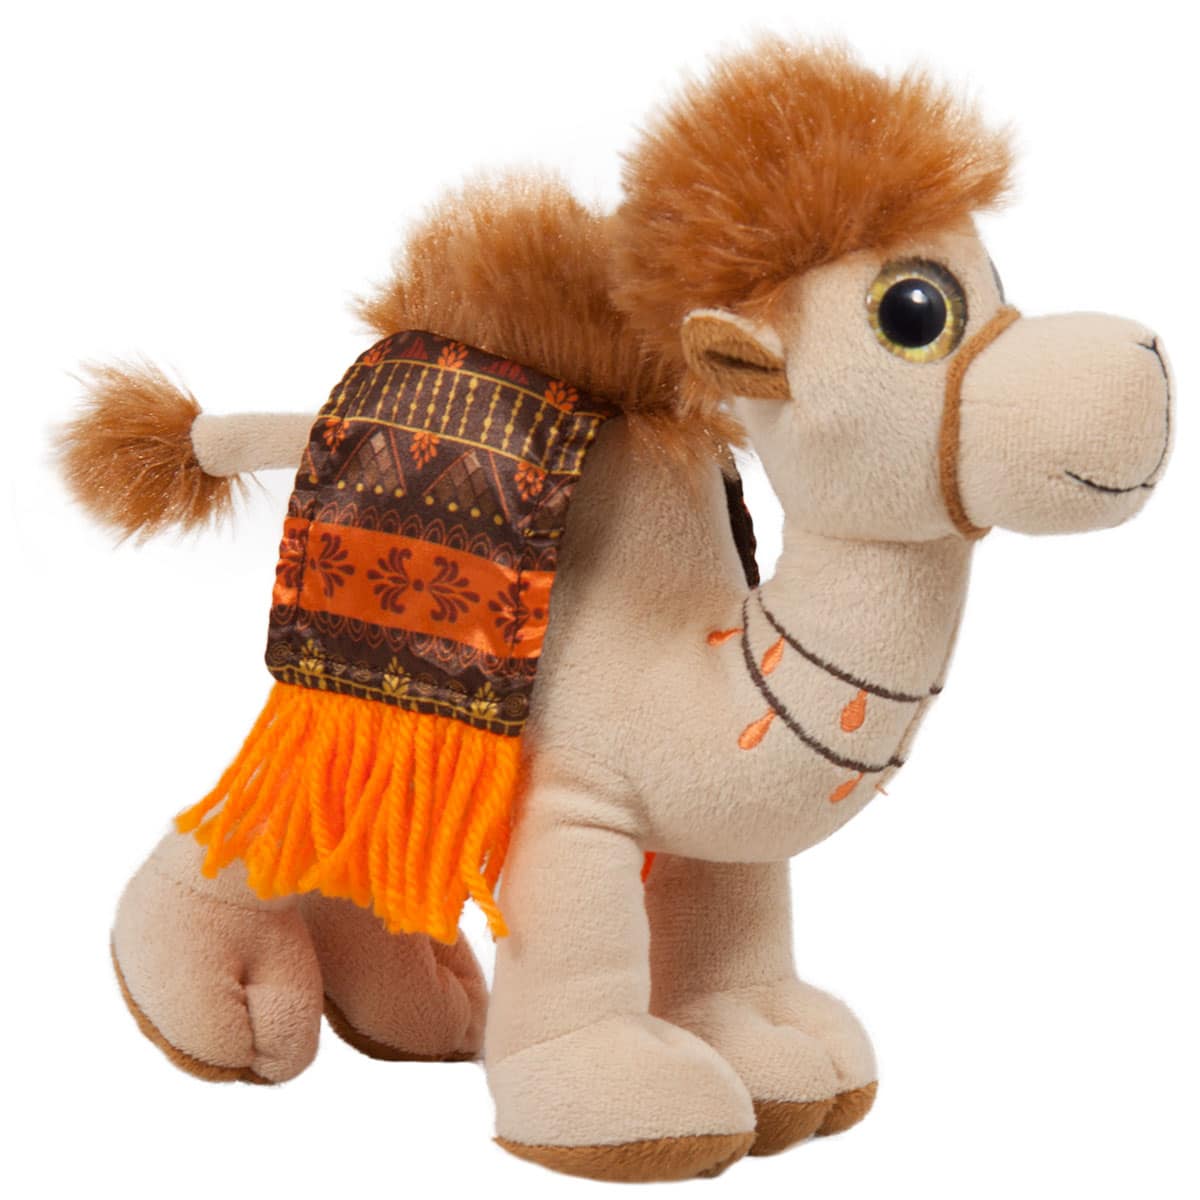 Camel with colorful saddle - Brown